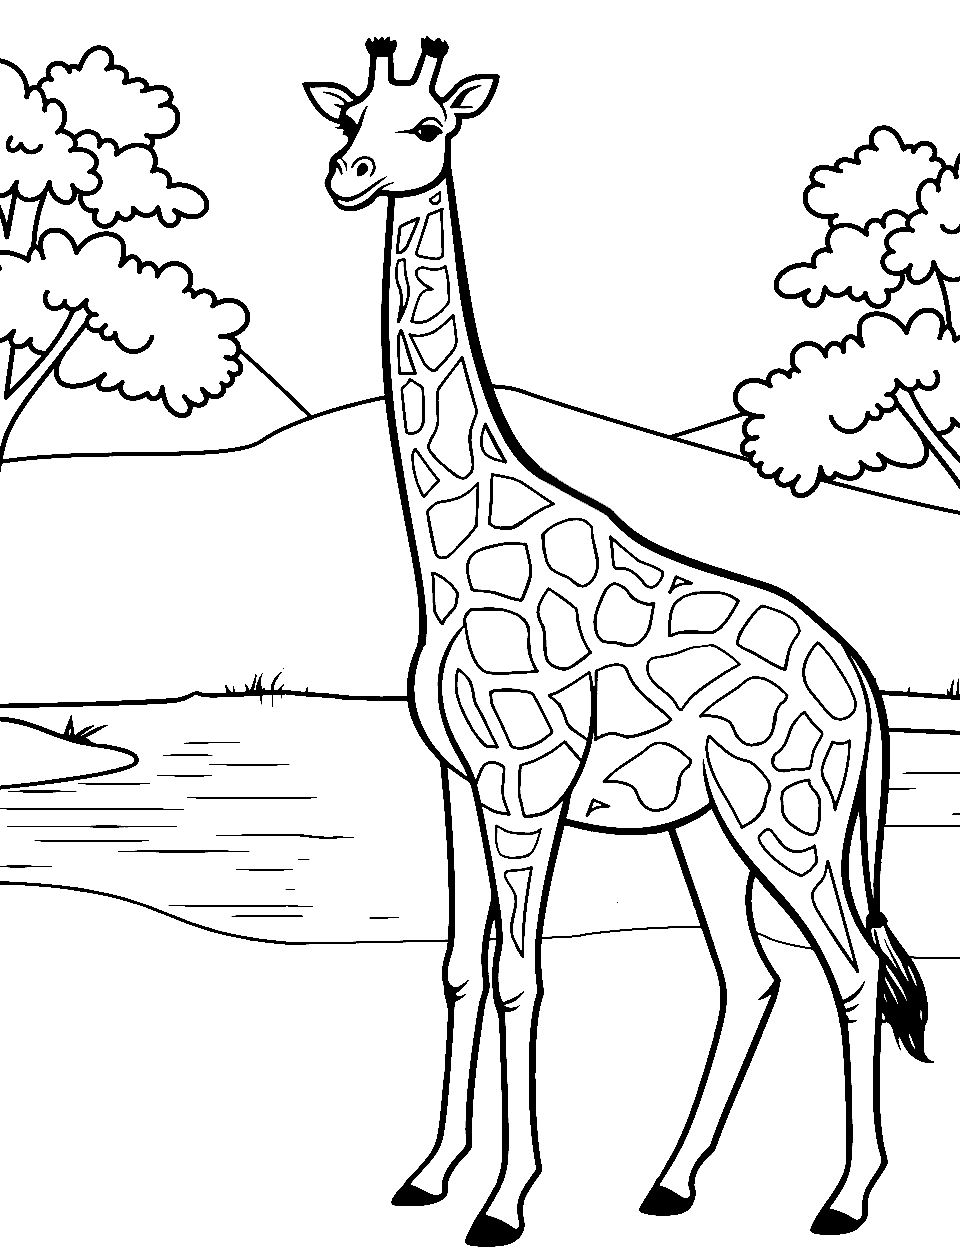 Stress Relief Giraffe Coloring Page - A soothing scene of a giraffe by a watering hole.